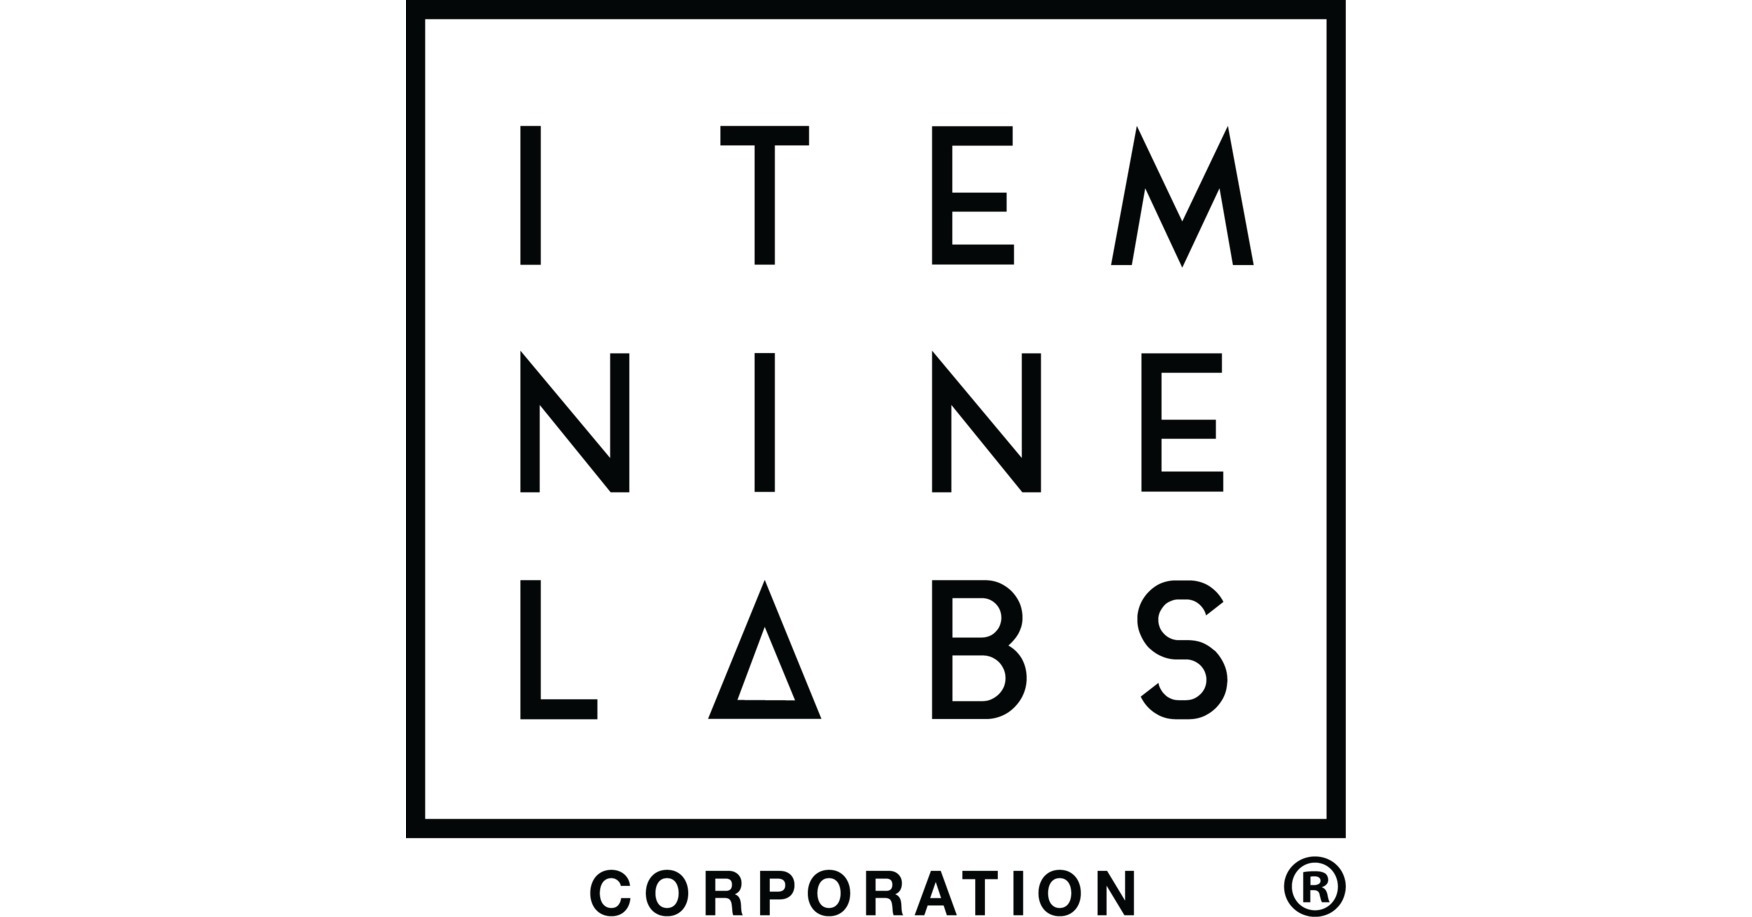 Item 9 Labs Corp. Launches Reg A+ Public Offering & Keep Cannabis Local Campaign